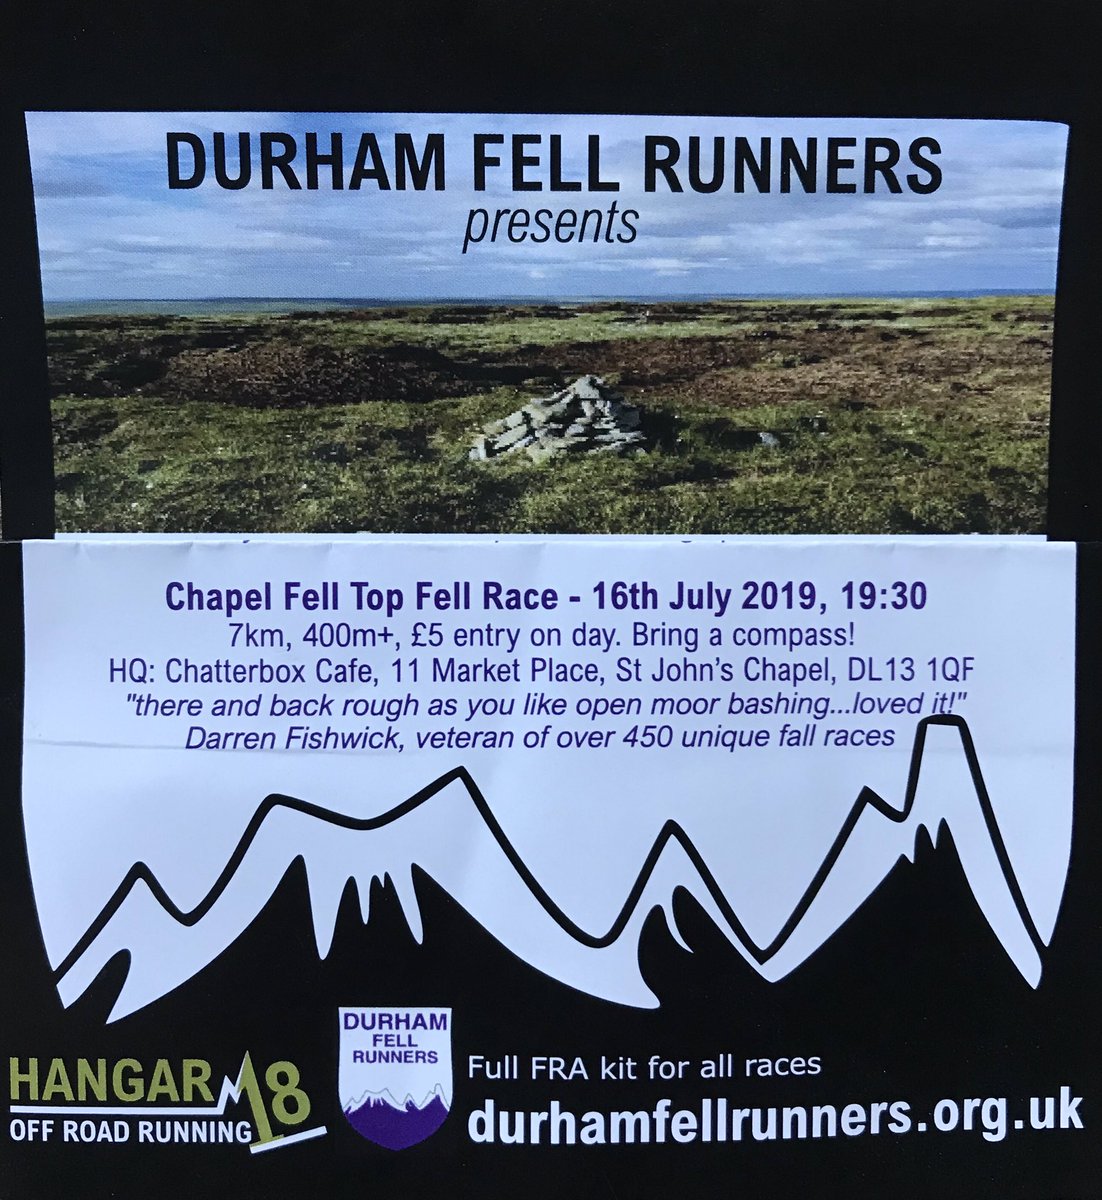 Hangar 18 supported Chapel Fell Top Race this Tuesday evening @DurhamFellRun @ChatterboxcafeC